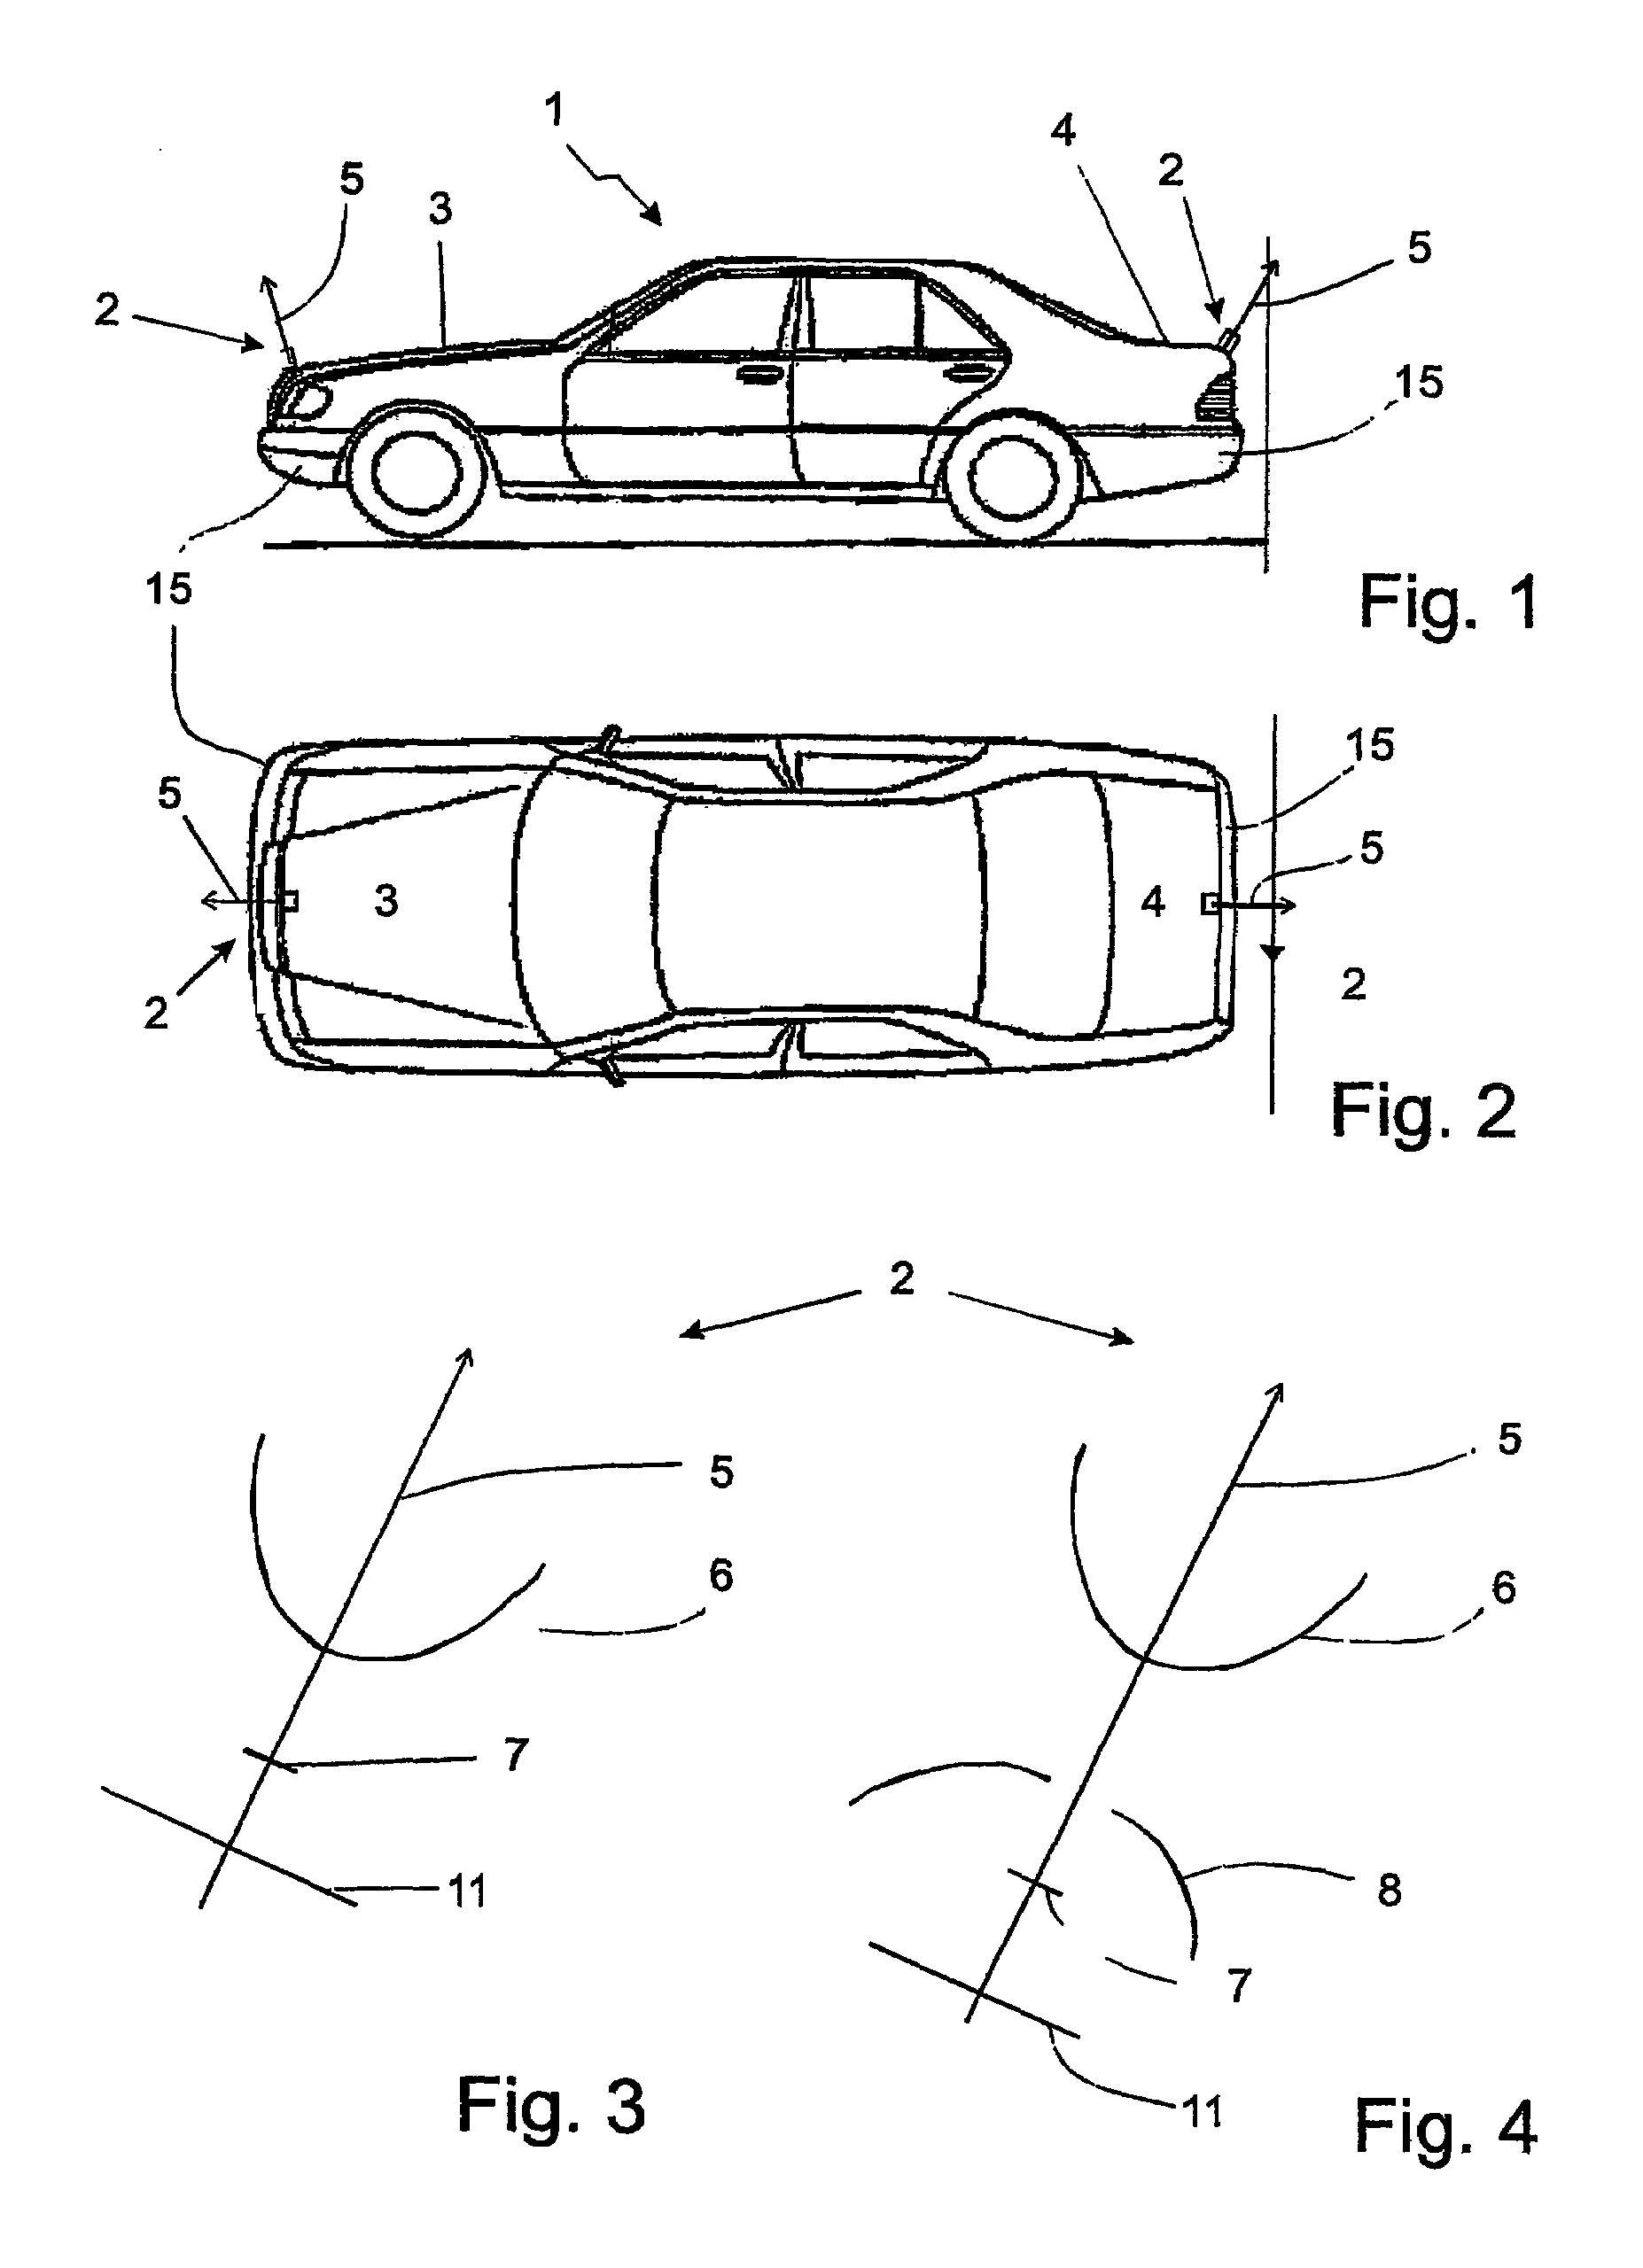 Vehicle with a catadioptric camera